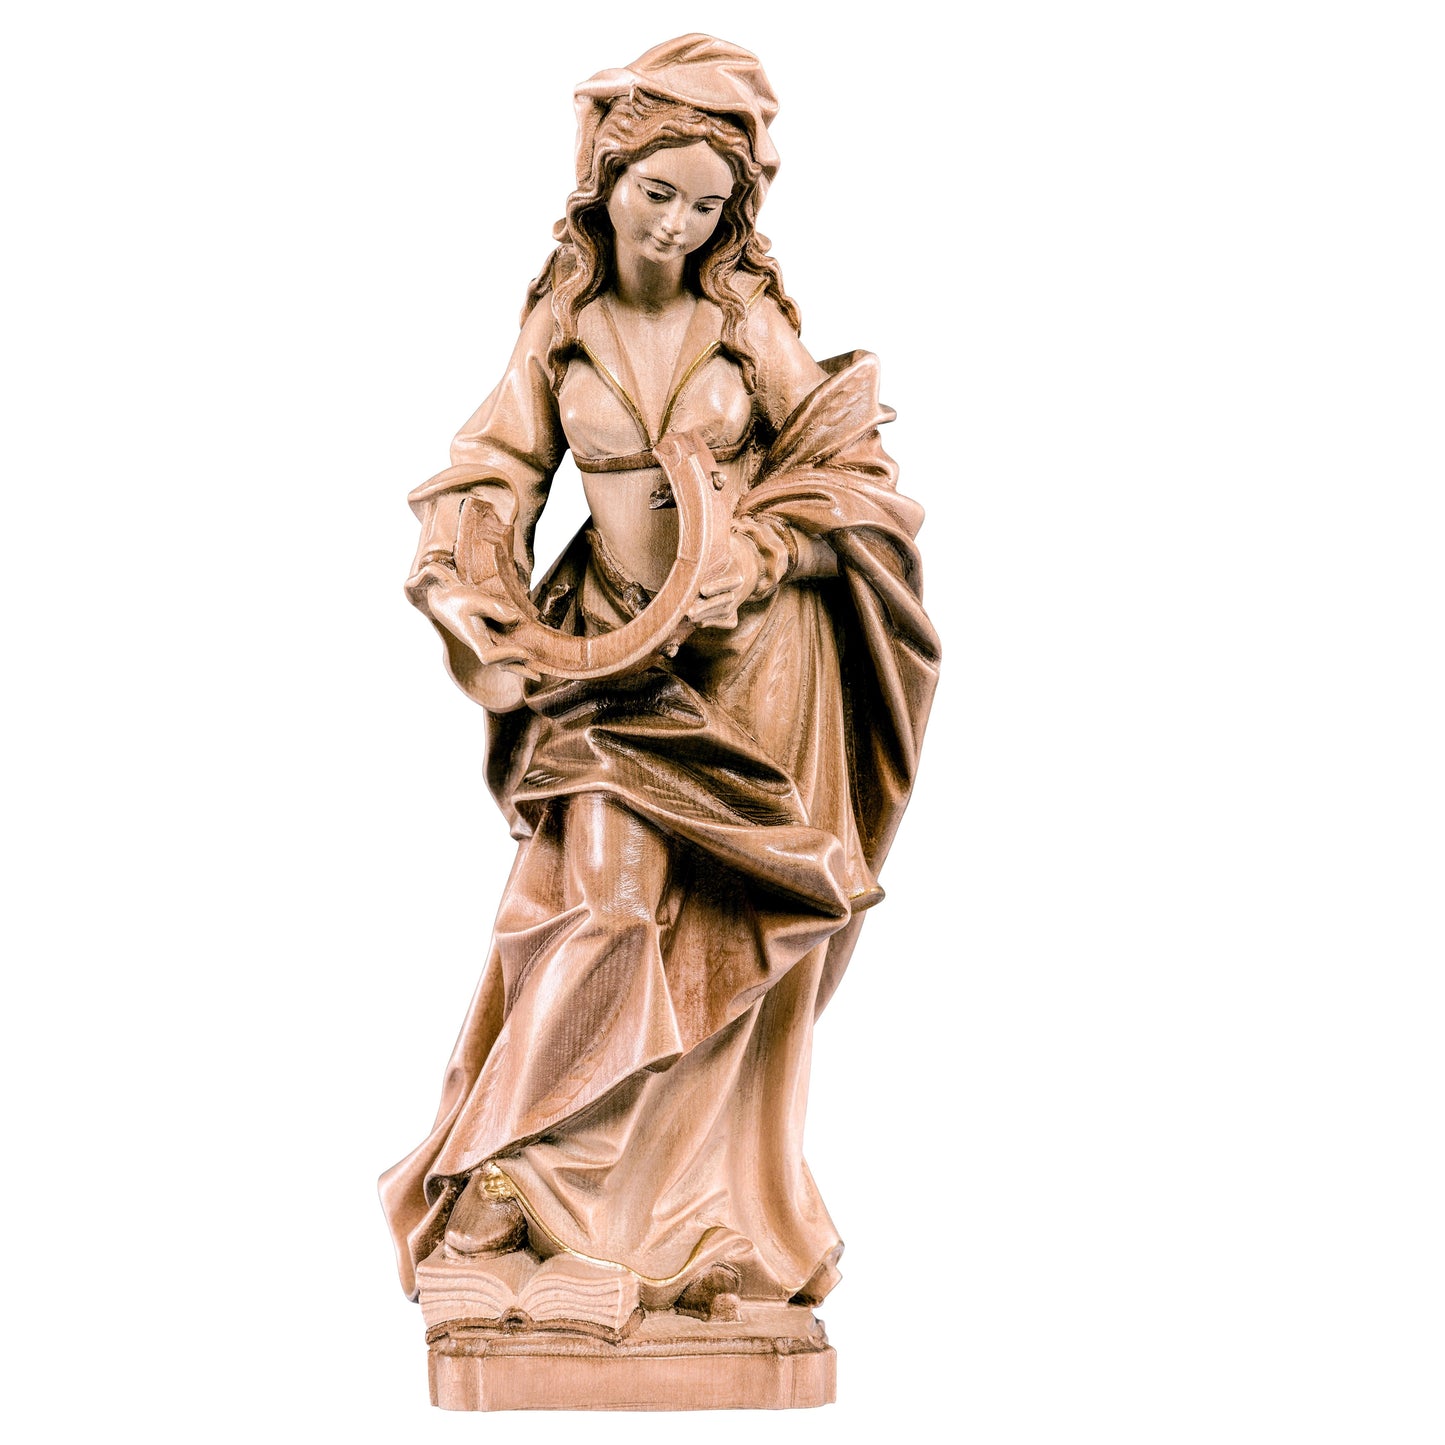 Mondo Cattolico Glossy / 15 cm (5.9 in) Wooden statue of St. Catherine